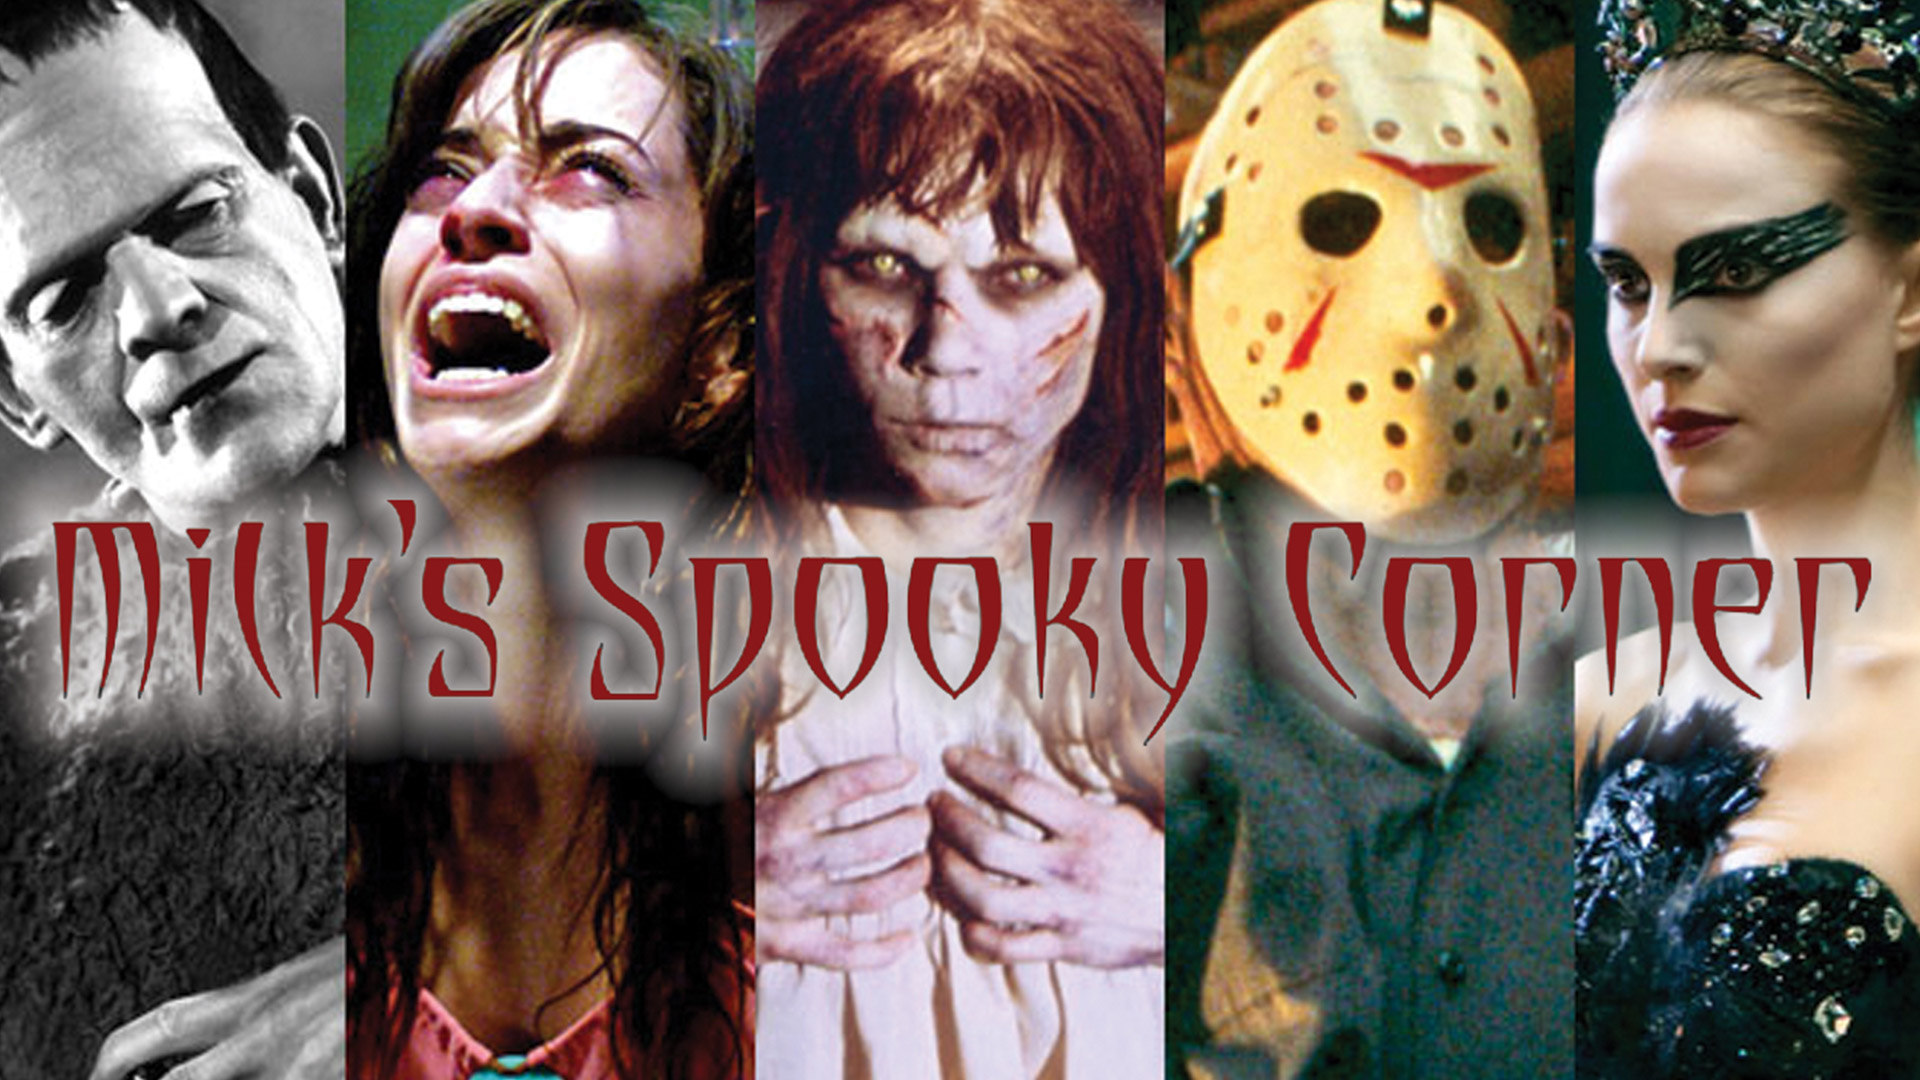 A collage of horror movie villans and screenshots from horror films including Jason, Frankenstien.